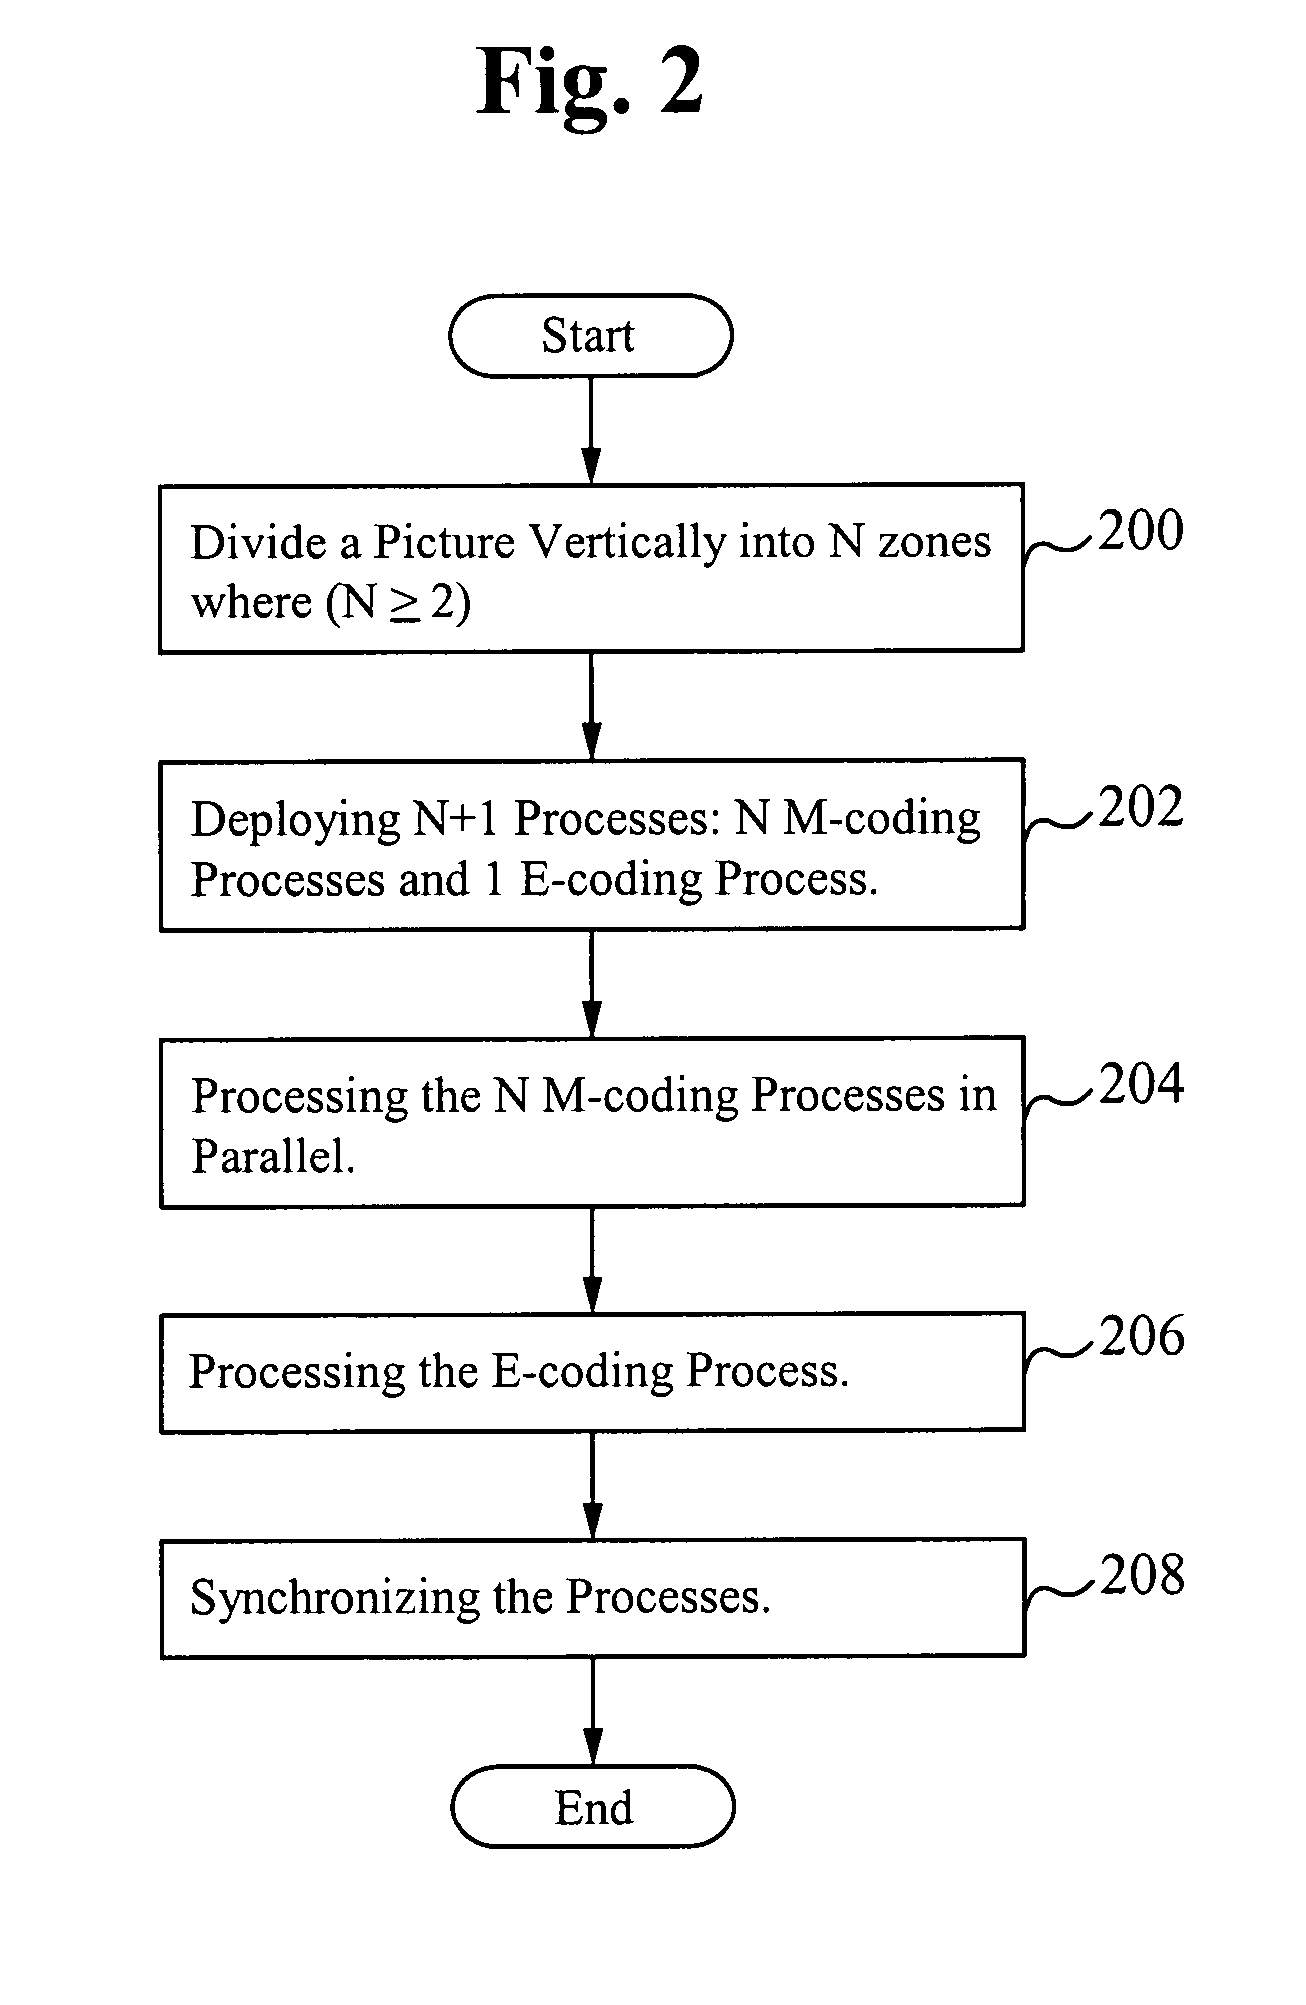 Parallel processing apparatus for video compression